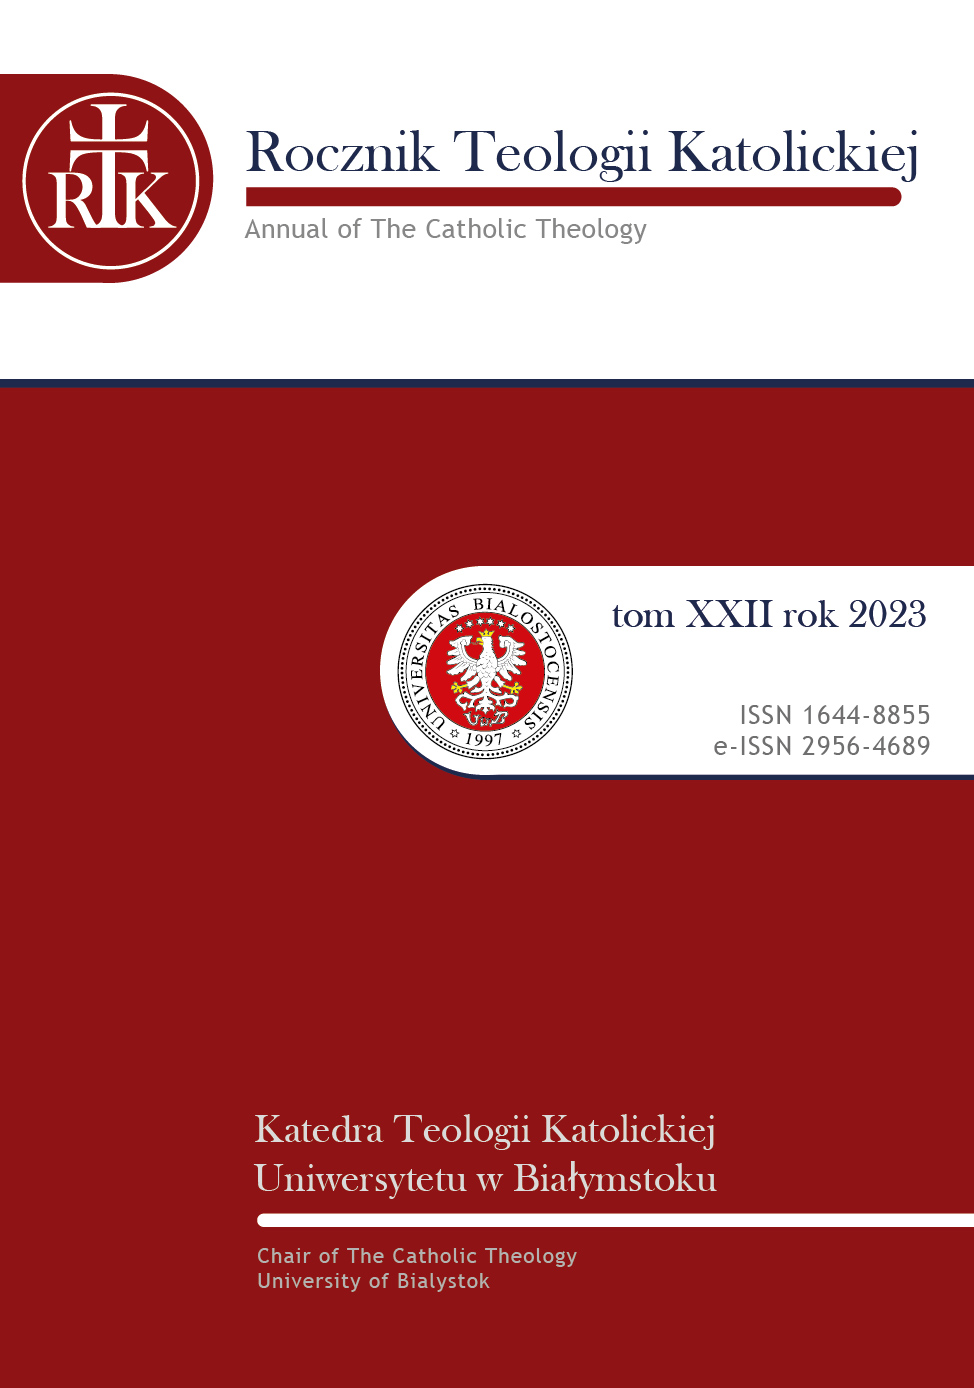 Religiosity and Secularisation of
Polish Youth in the 21st Century.
Quantitative Research Analysis Cover Image